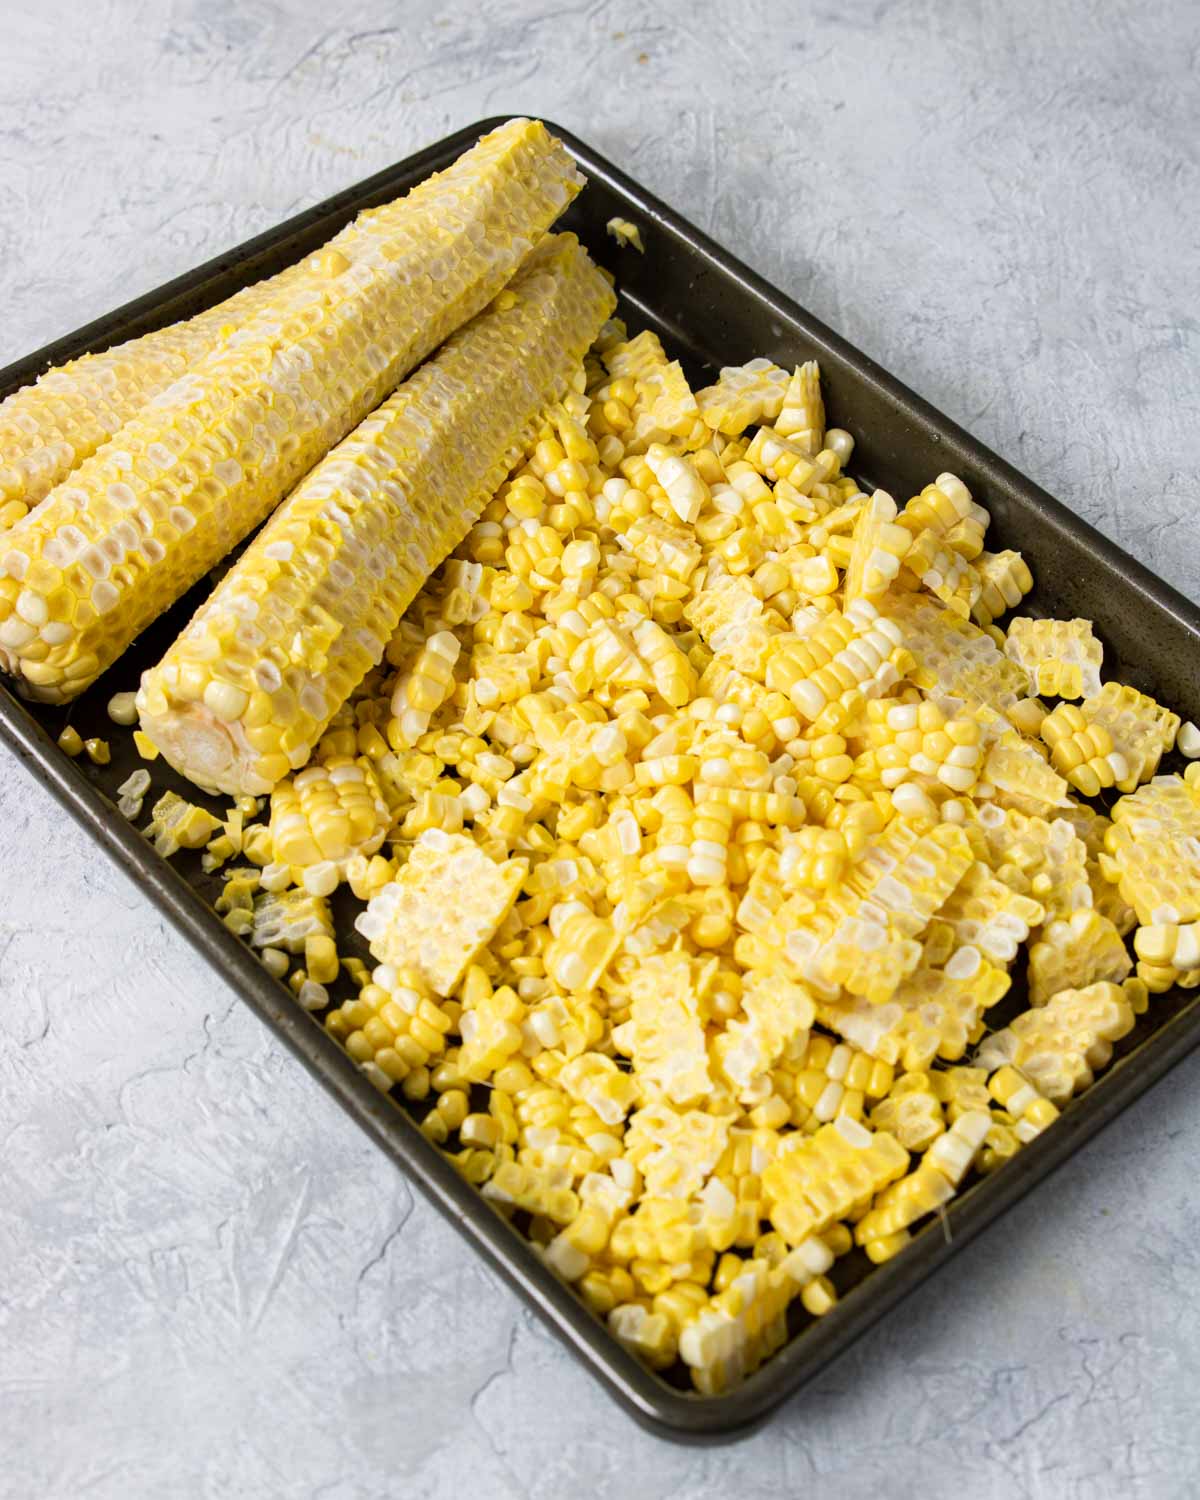 corn cobs with the corn kernels removed